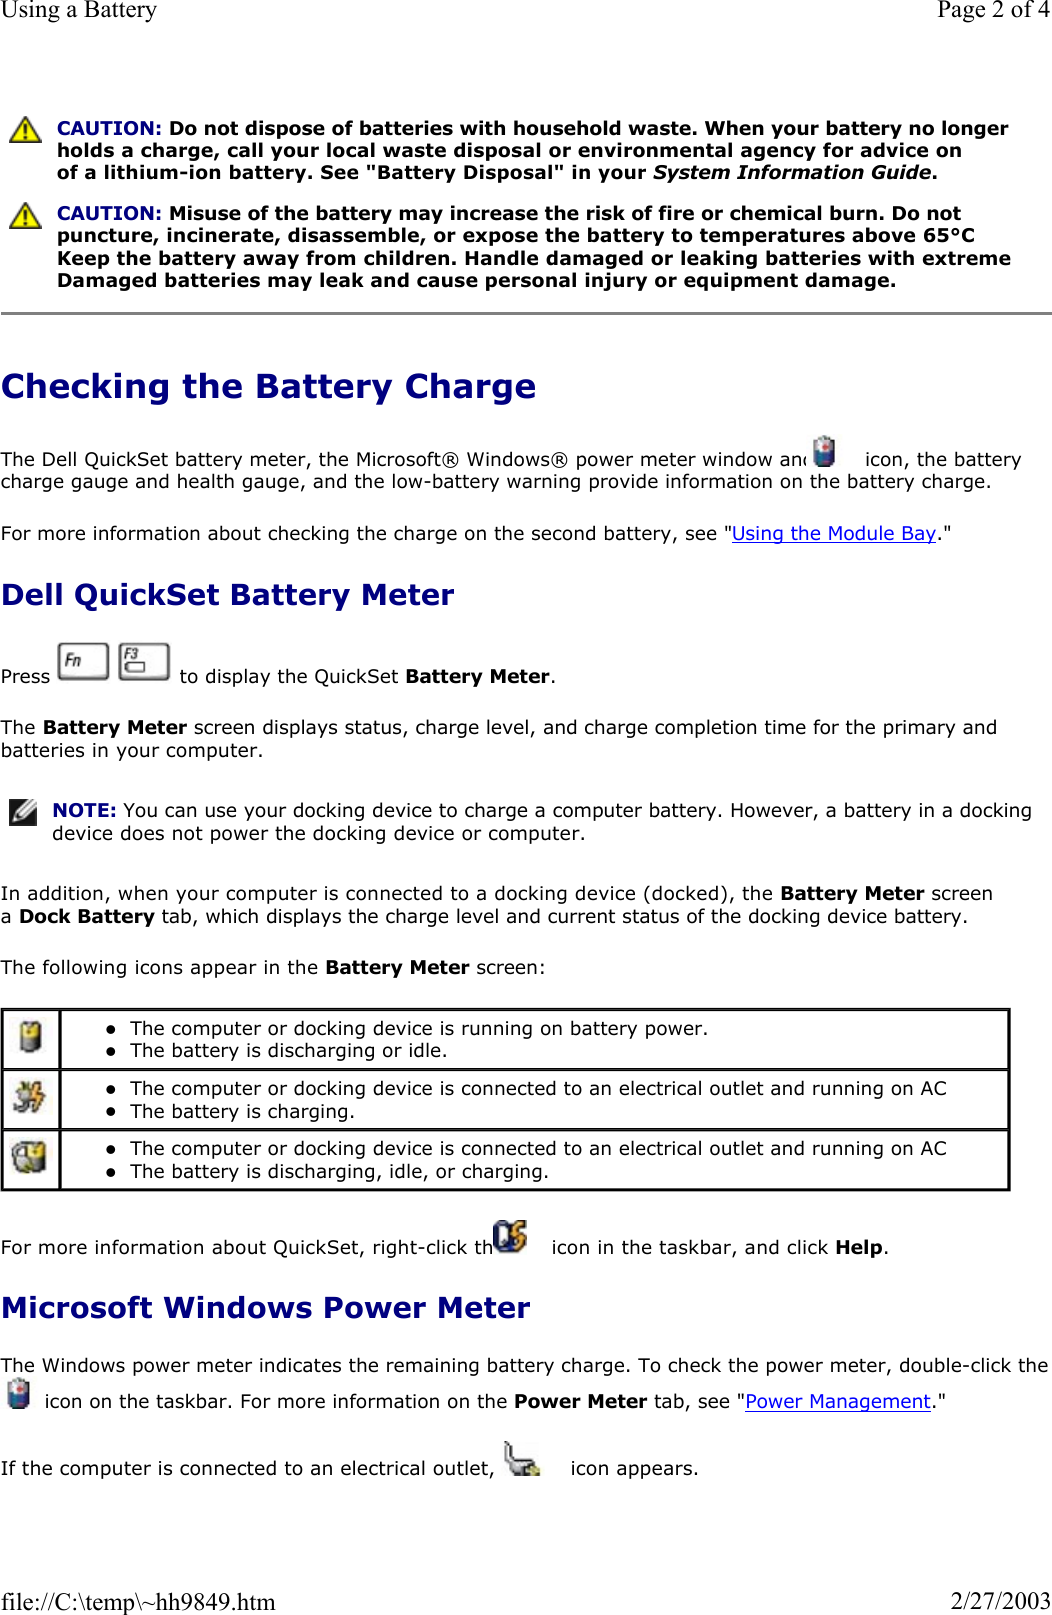 Checking the Battery Charge The Dell QuickSet battery meter, the Microsoft® Windows® power meter window and   icon, the battery charge gauge and health gauge, and the low-battery warning provide information on the battery charge.  For more information about checking the charge on the second battery, see &quot;Using the Module Bay.&quot;Dell QuickSet Battery Meter Press     to display the QuickSet Battery Meter.The Battery Meter screen displays status, charge level, and charge completion time for the primary and batteries in your computer. In addition, when your computer is connected to a docking device (docked), the Battery Meter screen aDock Battery tab, which displays the charge level and current status of the docking device battery. The following icons appear in the Battery Meter screen: For more information about QuickSet, right-click the   icon in the taskbar, and click Help.Microsoft Windows Power Meter The Windows power meter indicates the remaining battery charge. To check the power meter, double-click the icon on the taskbar. For more information on the Power Meter tab, see &quot;Power Management.&quot;If the computer is connected to an electrical outlet, a   icon appears. CAUTION: Do not dispose of batteries with household waste. When your battery no longer holds a charge, call your local waste disposal or environmental agency for advice on of a lithium-ion battery. See &quot;Battery Disposal&quot; in your System Information Guide.CAUTION: Misuse of the battery may increase the risk of fire or chemical burn. Do not puncture, incinerate, disassemble, or expose the battery to temperatures above 65°C Keep the battery away from children. Handle damaged or leaking batteries with extreme Damaged batteries may leak and cause personal injury or equipment damage. NOTE: You can use your docking device to charge a computer battery. However, a battery in a docking device does not power the docking device or computer.zThe computer or docking device is running on battery power.  zThe battery is discharging or idle.  zThe computer or docking device is connected to an electrical outlet and running on AC zThe battery is charging.  zThe computer or docking device is connected to an electrical outlet and running on AC zThe battery is discharging, idle, or charging.  Page 2 of 4Using a Battery2/27/2003file://C:\temp\~hh9849.htm